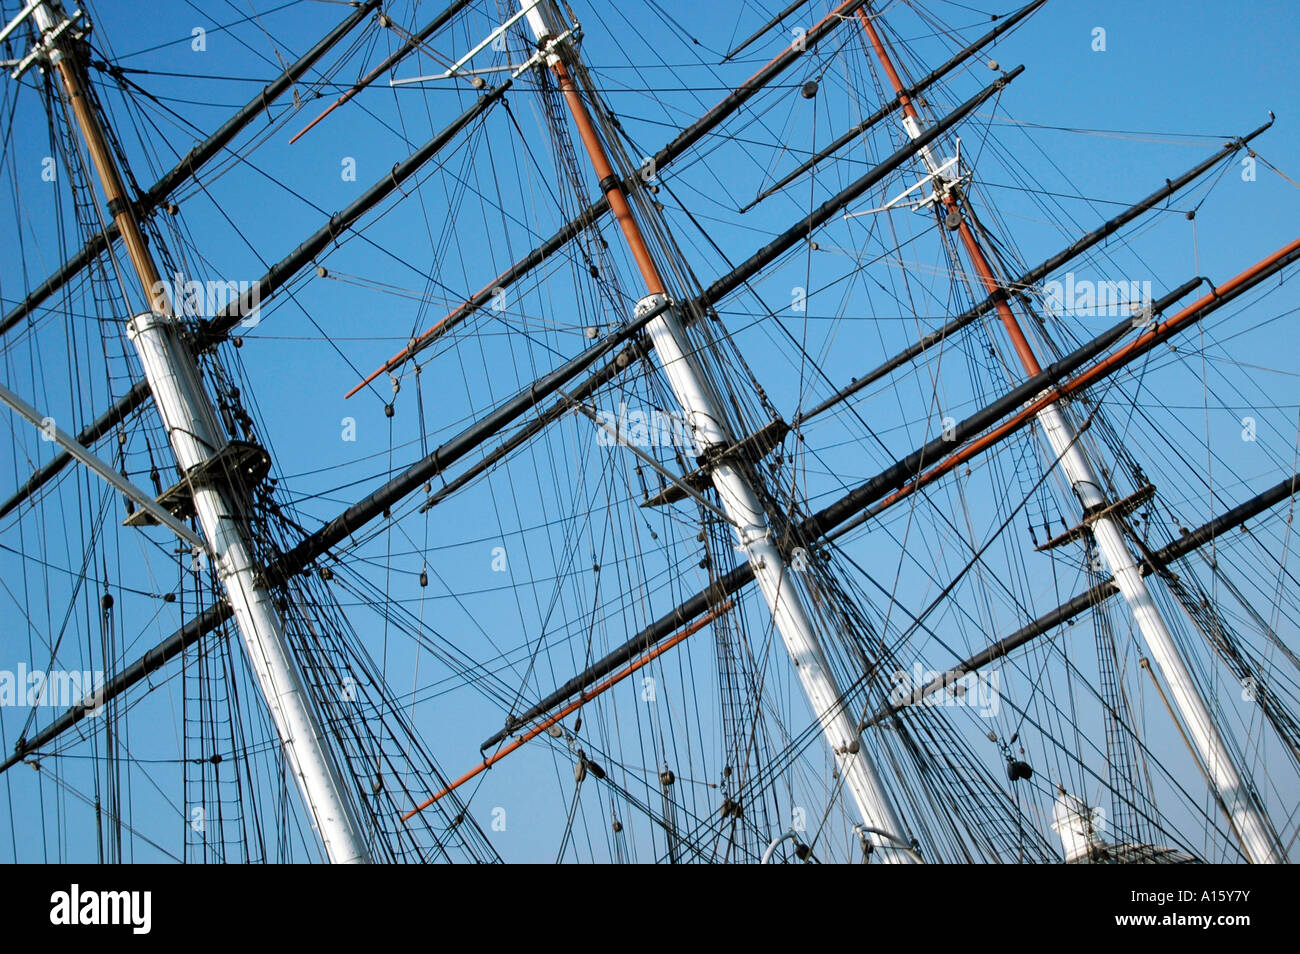 Horizontal close up of the Cutty Sark's rigging and masts against a brilliant blue sky Stock Photo